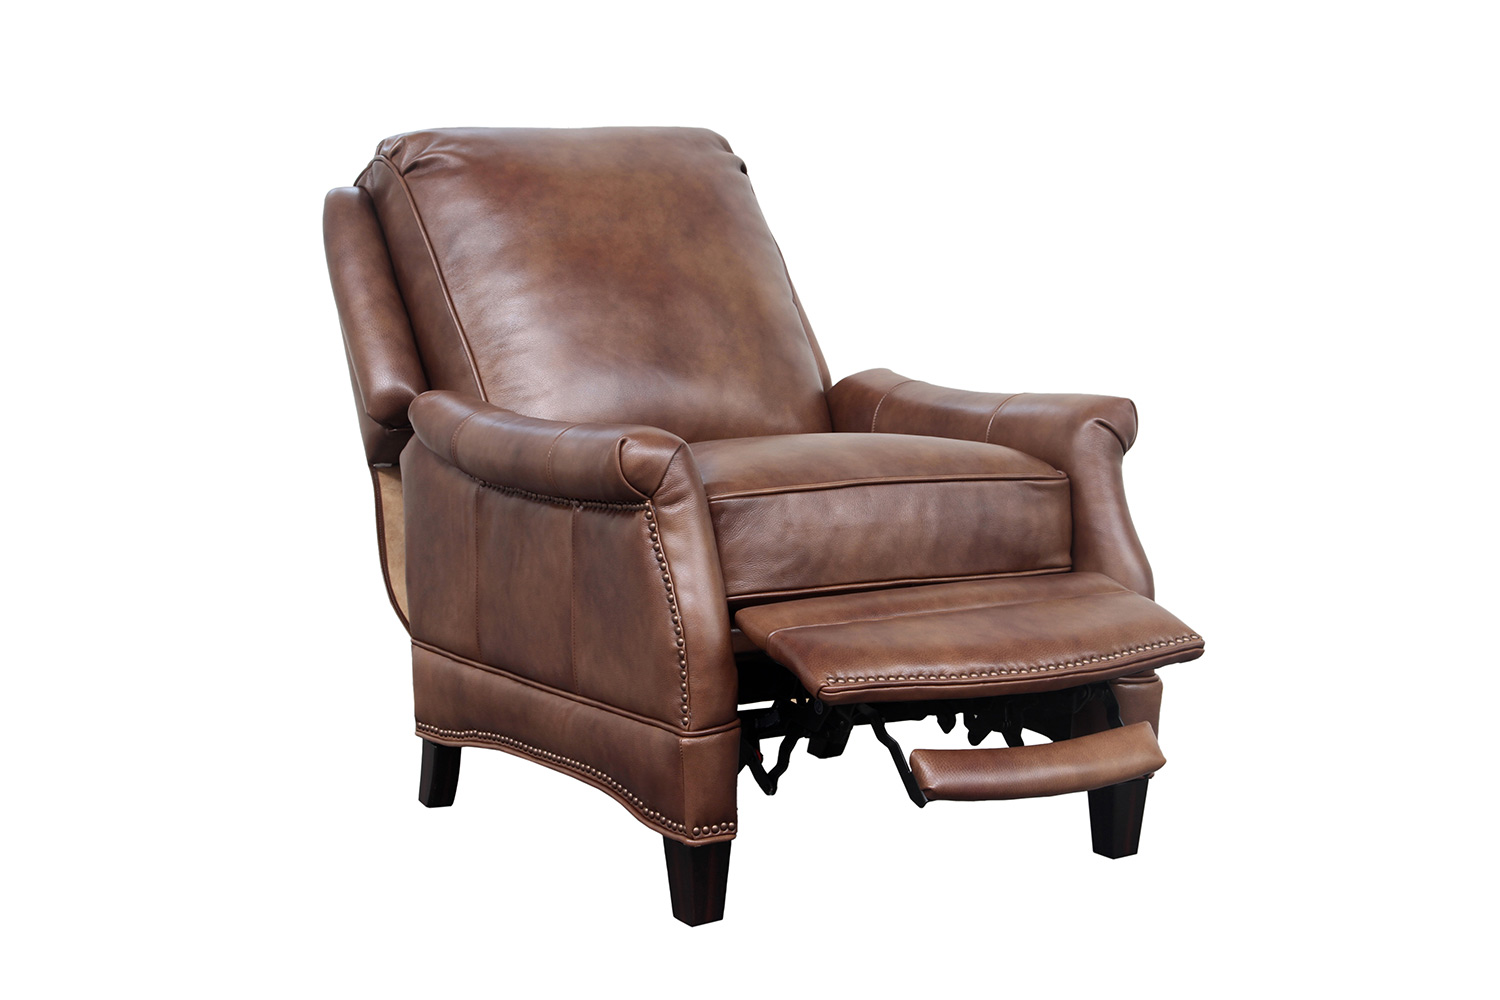 Barcalounger Ashebrooke Recliner Chair - Wenlock Tawny/All Leather